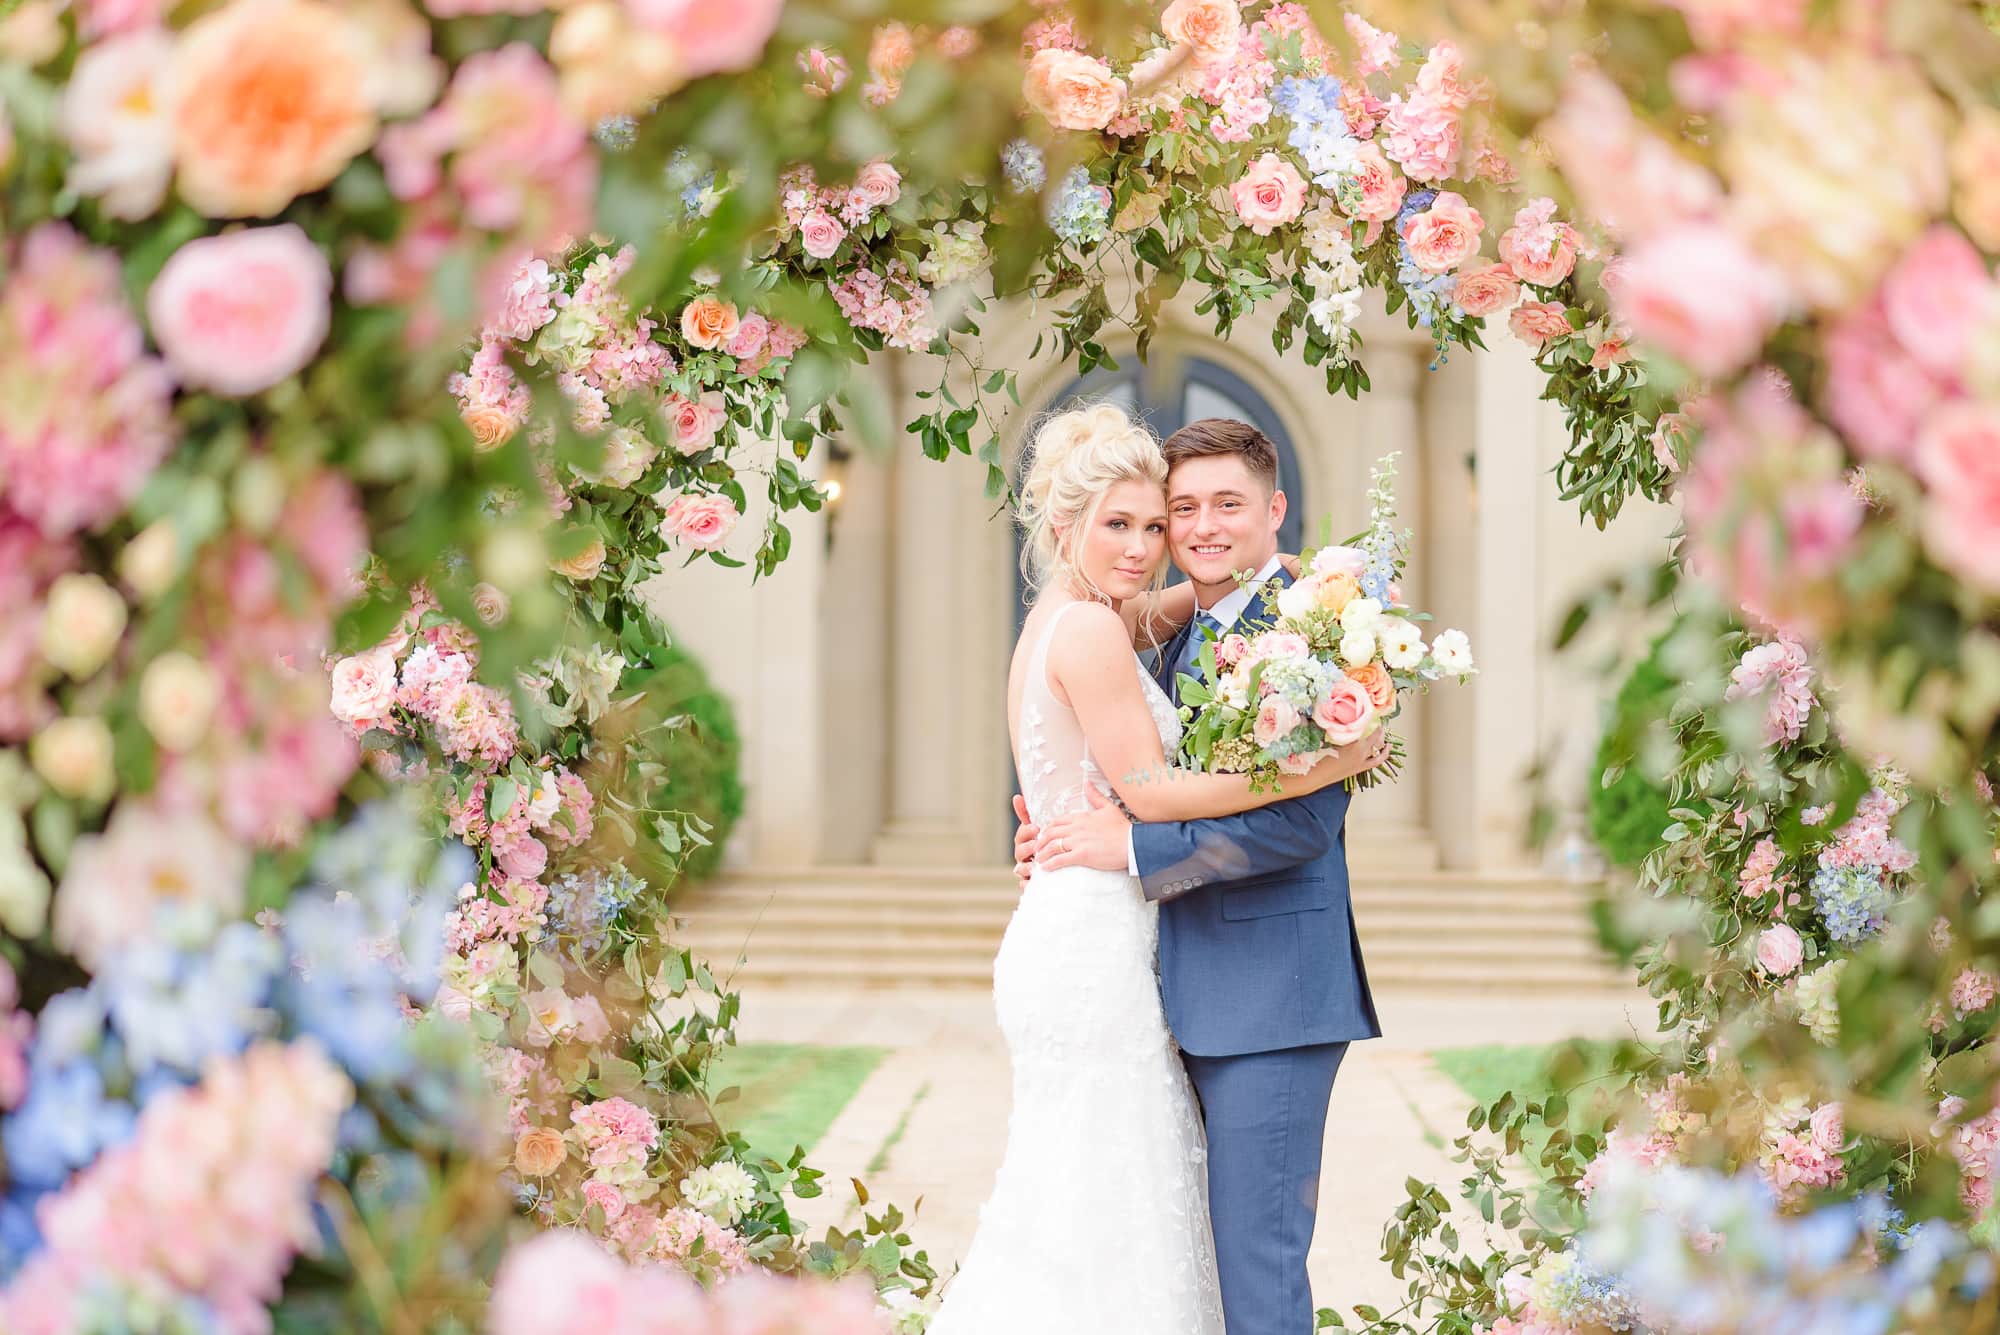 Their backdrop is dripping with flowers, and it creates a circle which we can see the bride and groom through.